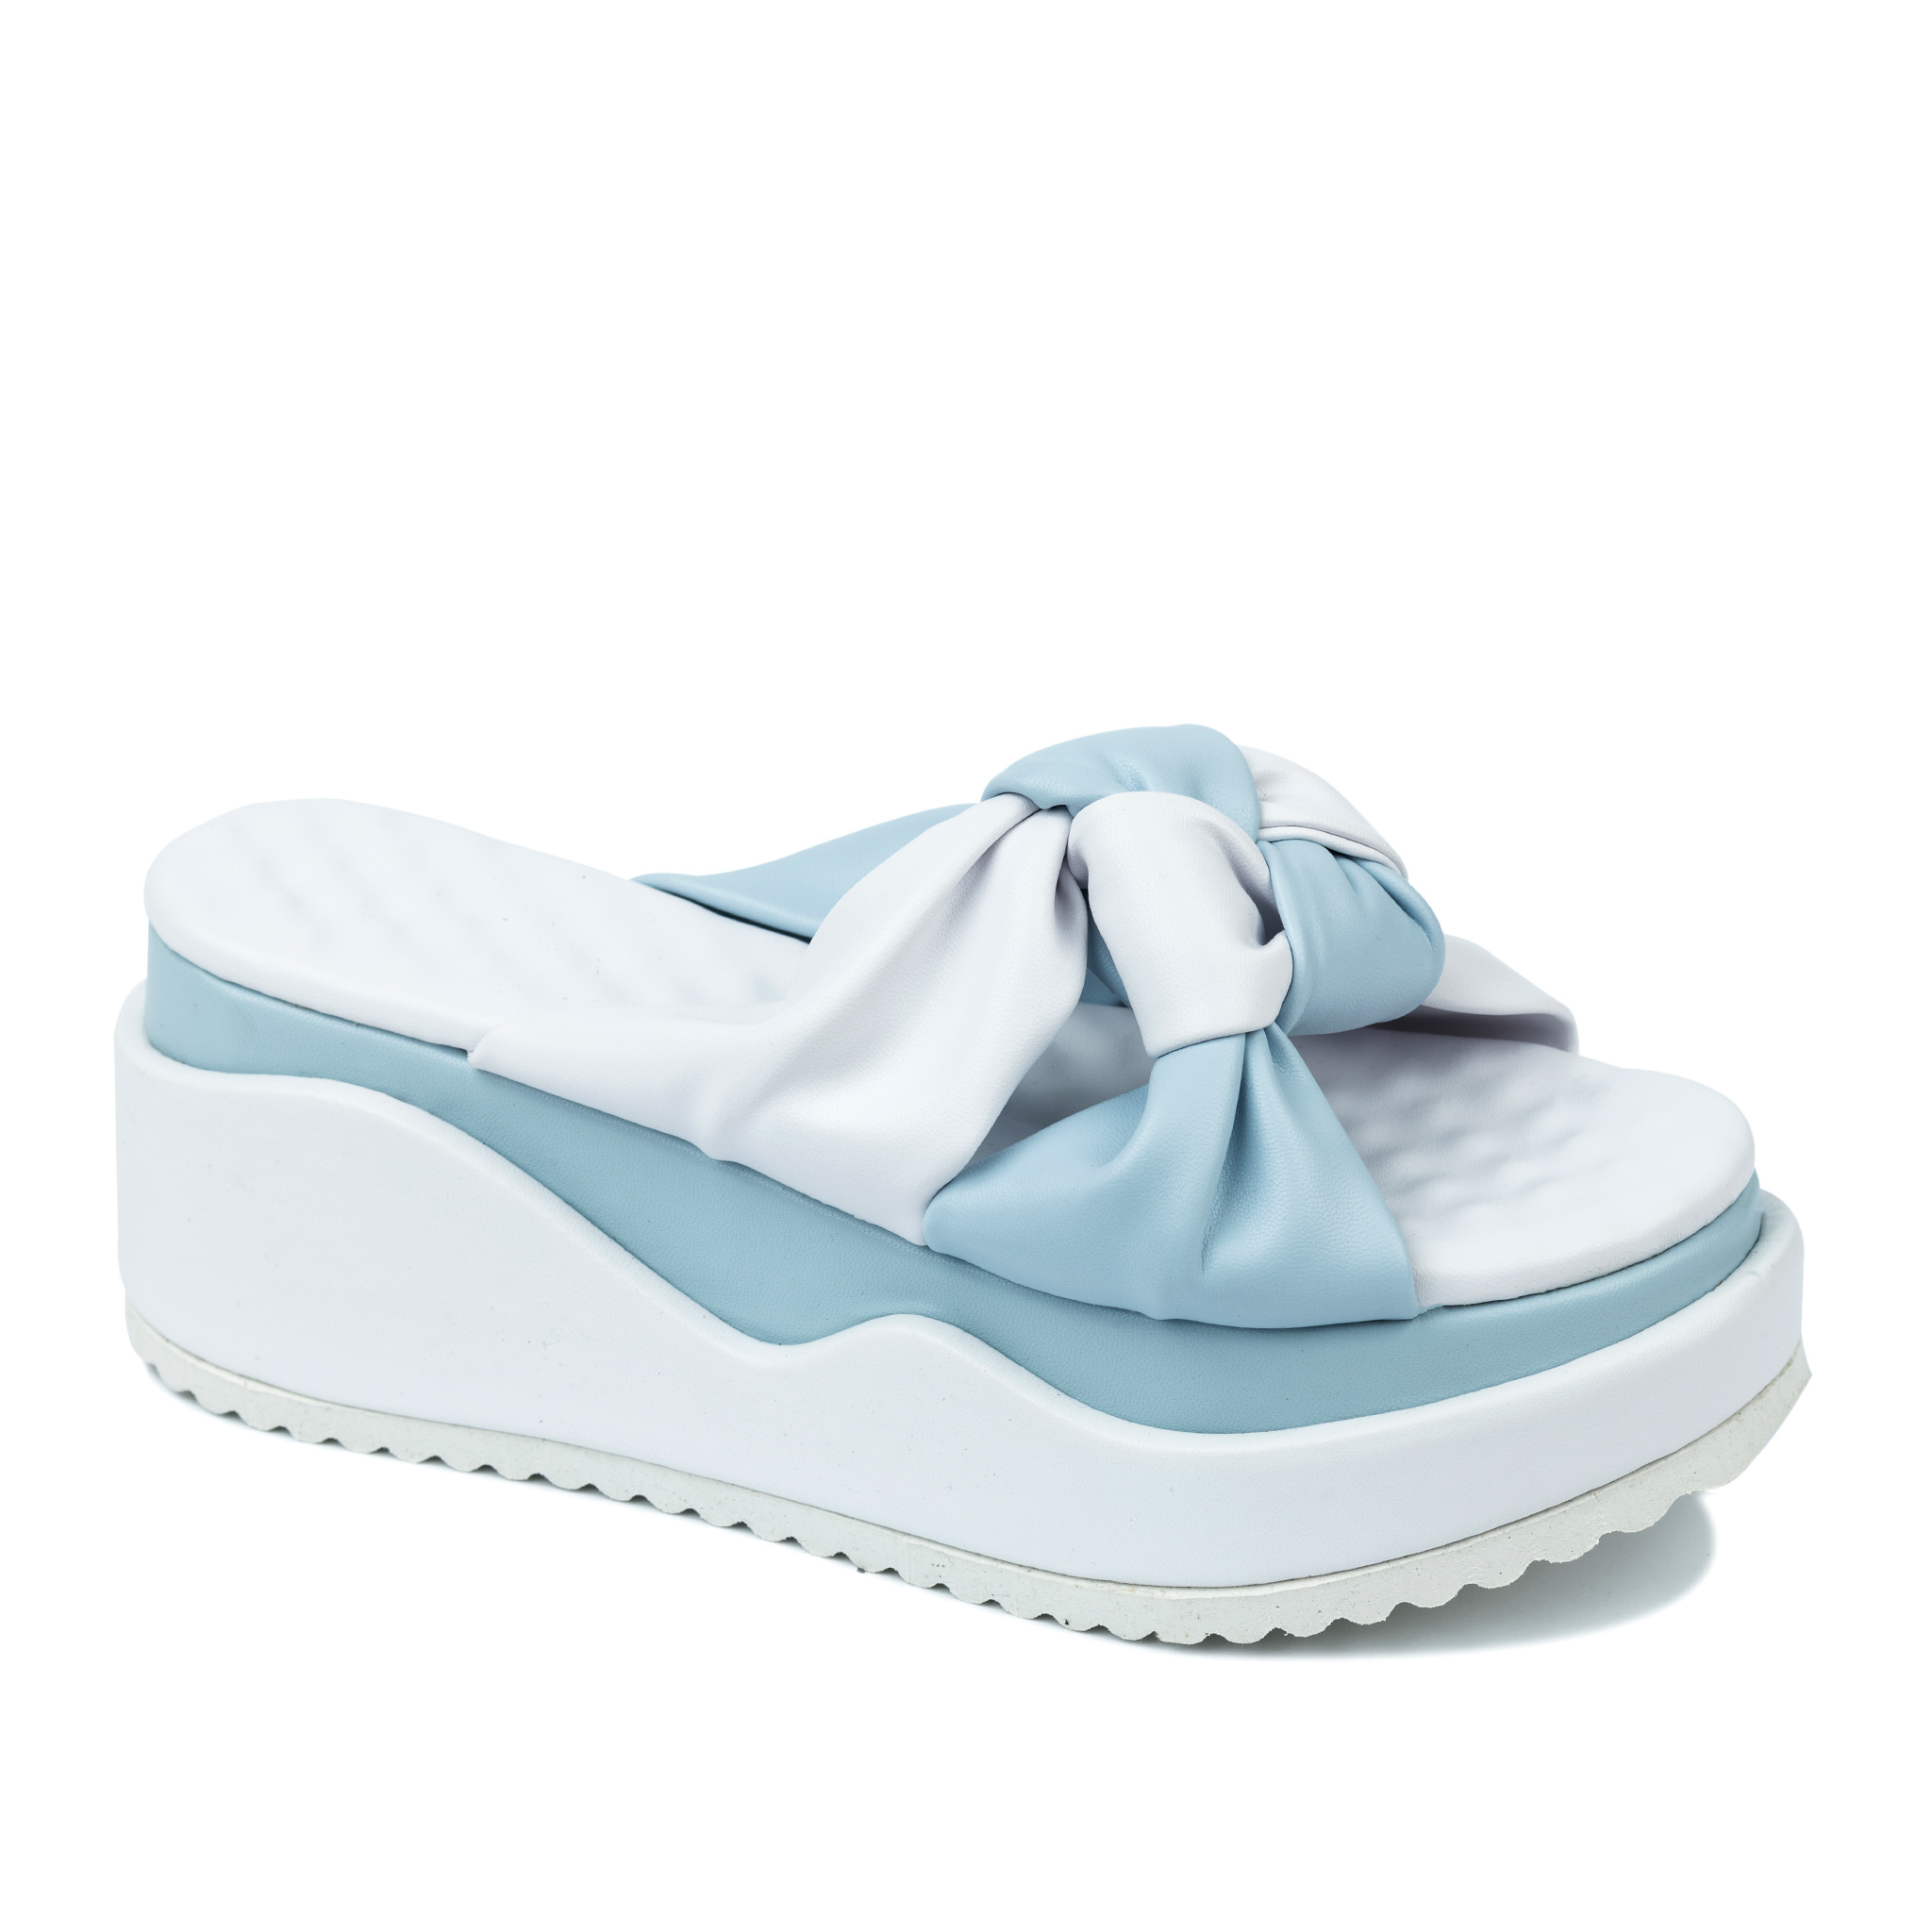 Women Slippers and Mules A308 - BLUE